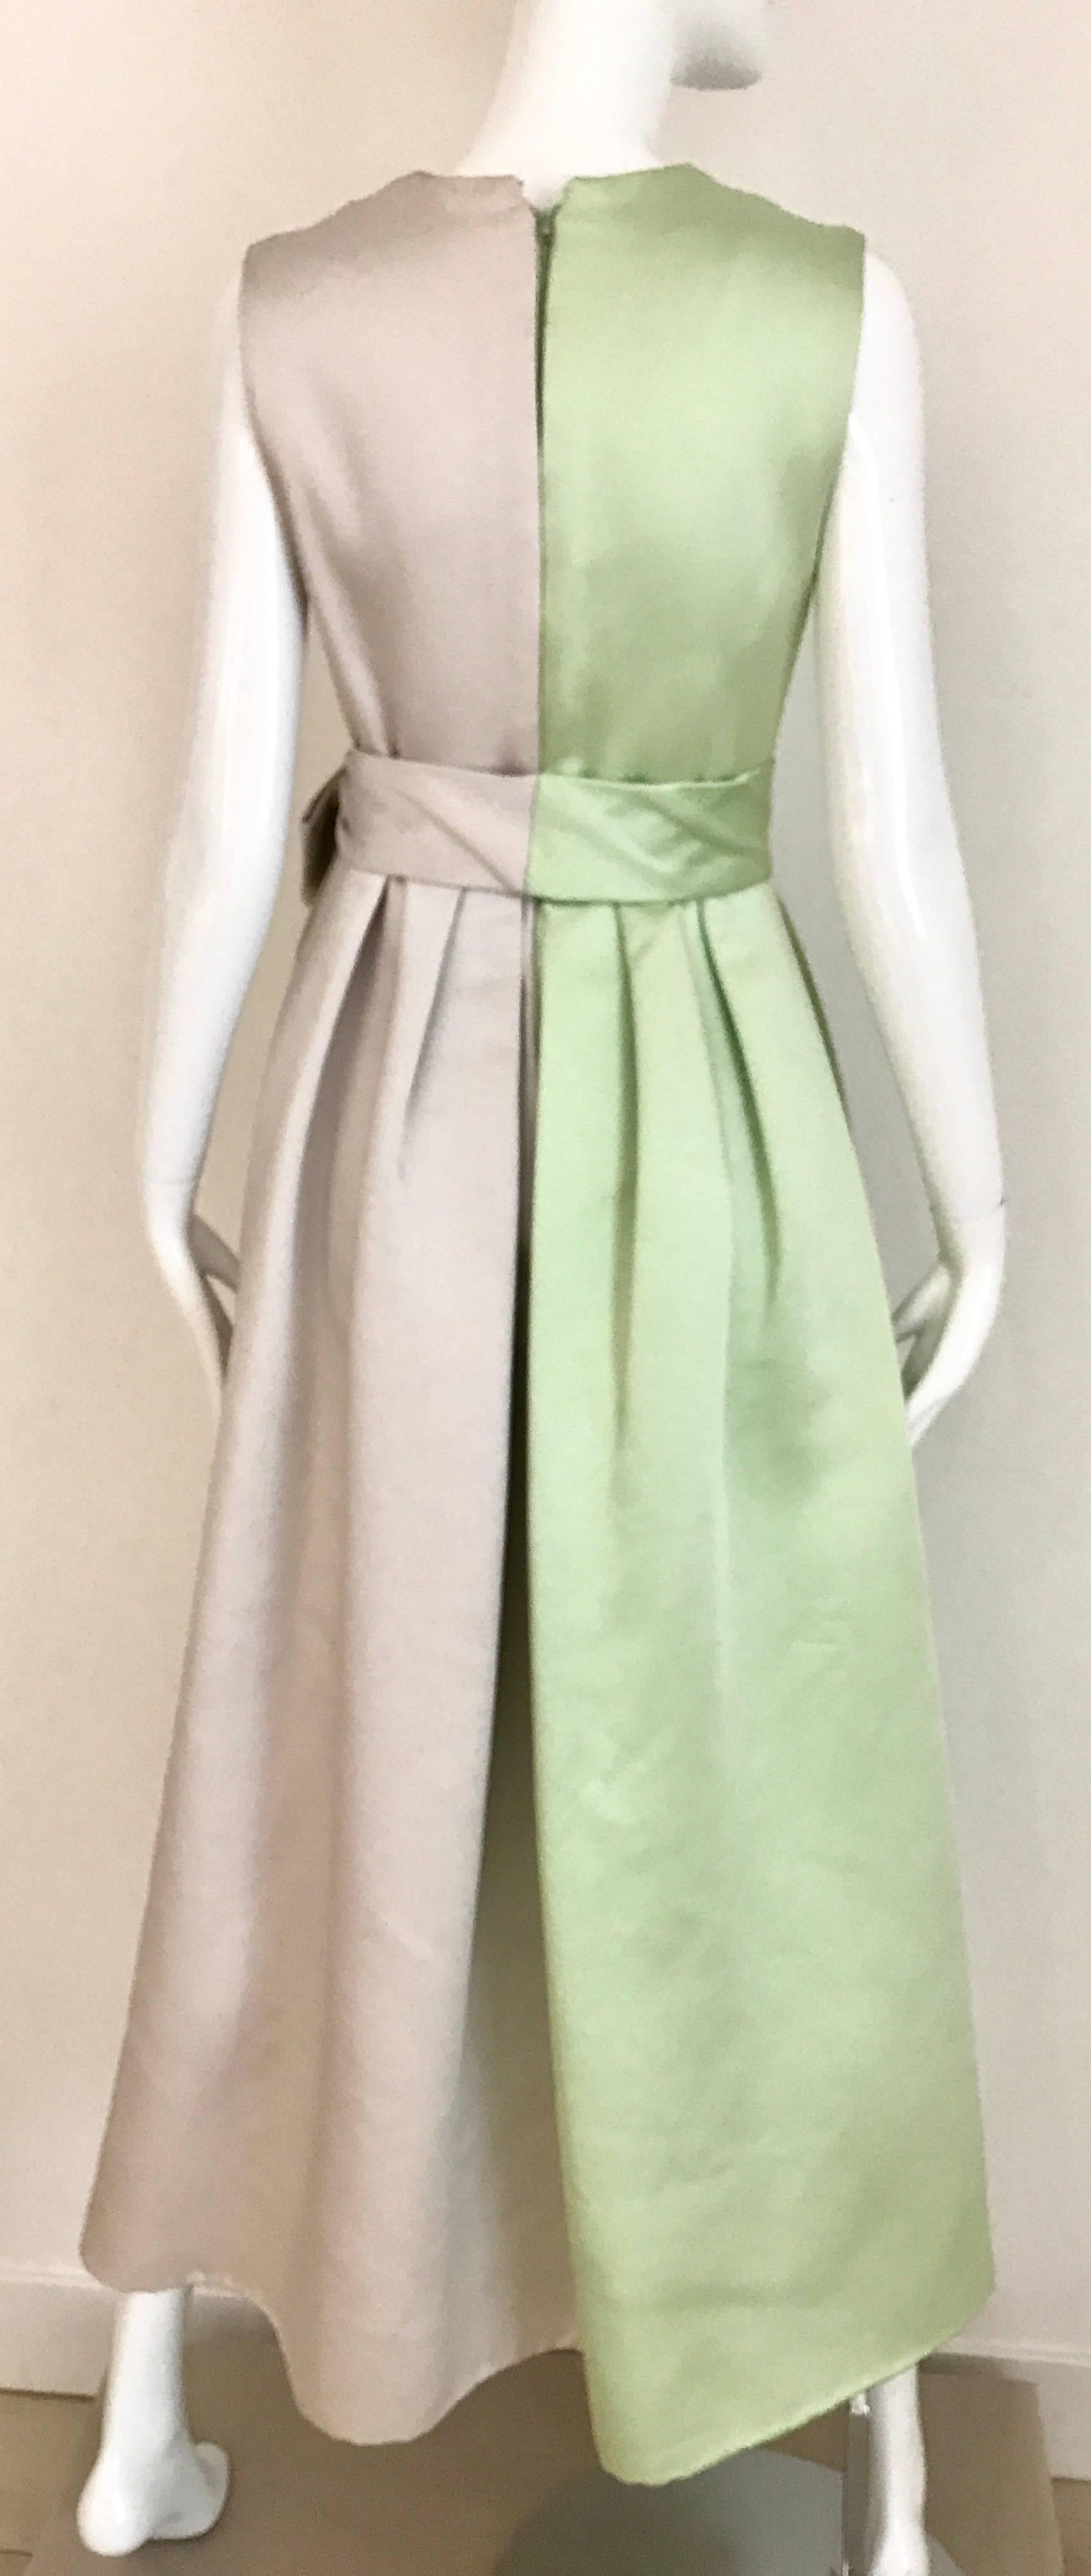 Women's 1960s Celadon Green and Grey Sleeveless Silk Dres with Bow